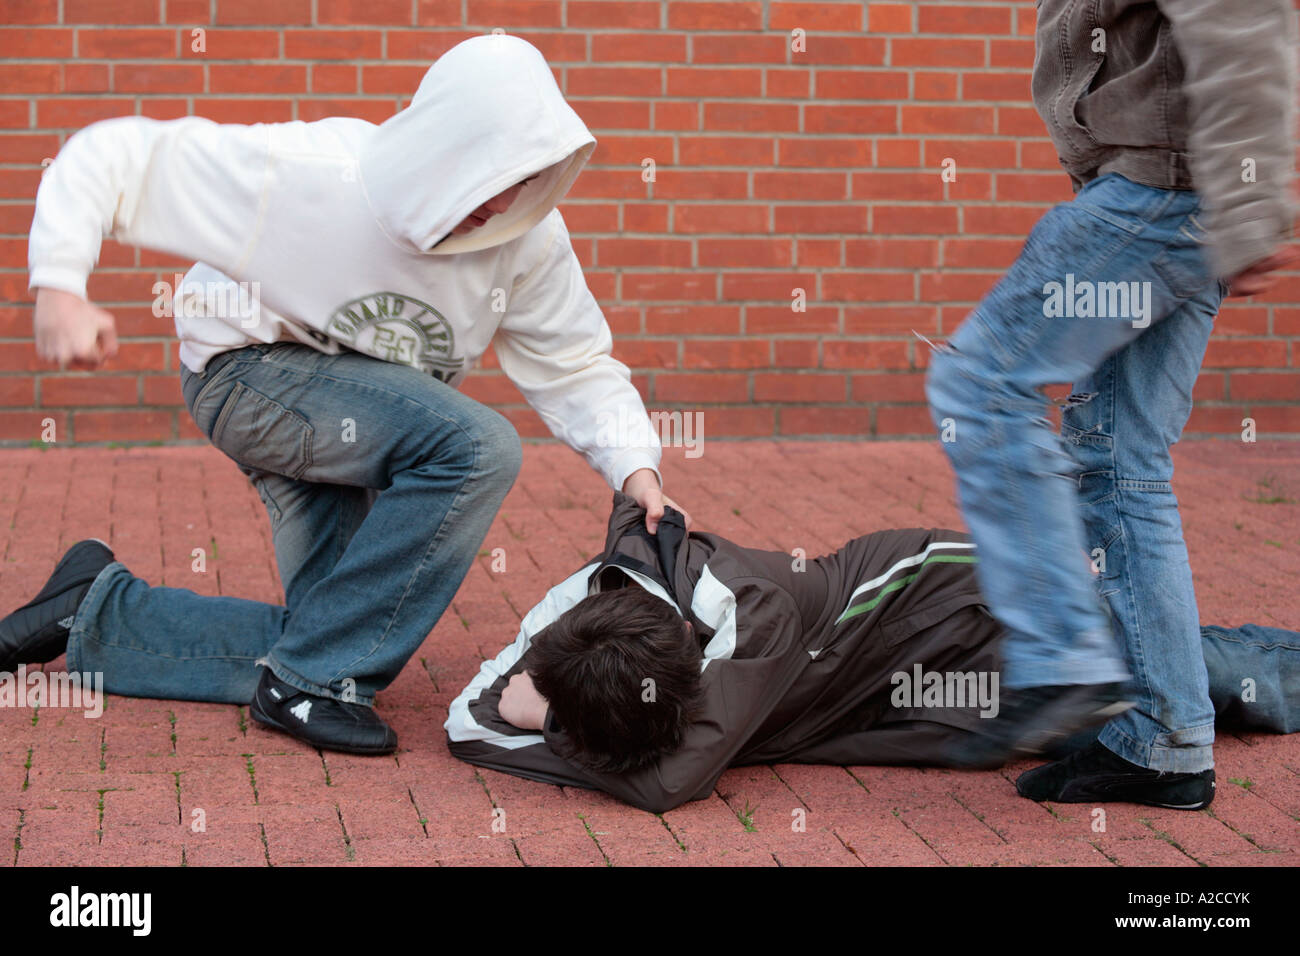 two boys hitting and kicking another one who is lying on the ground helplessly Stock Photo